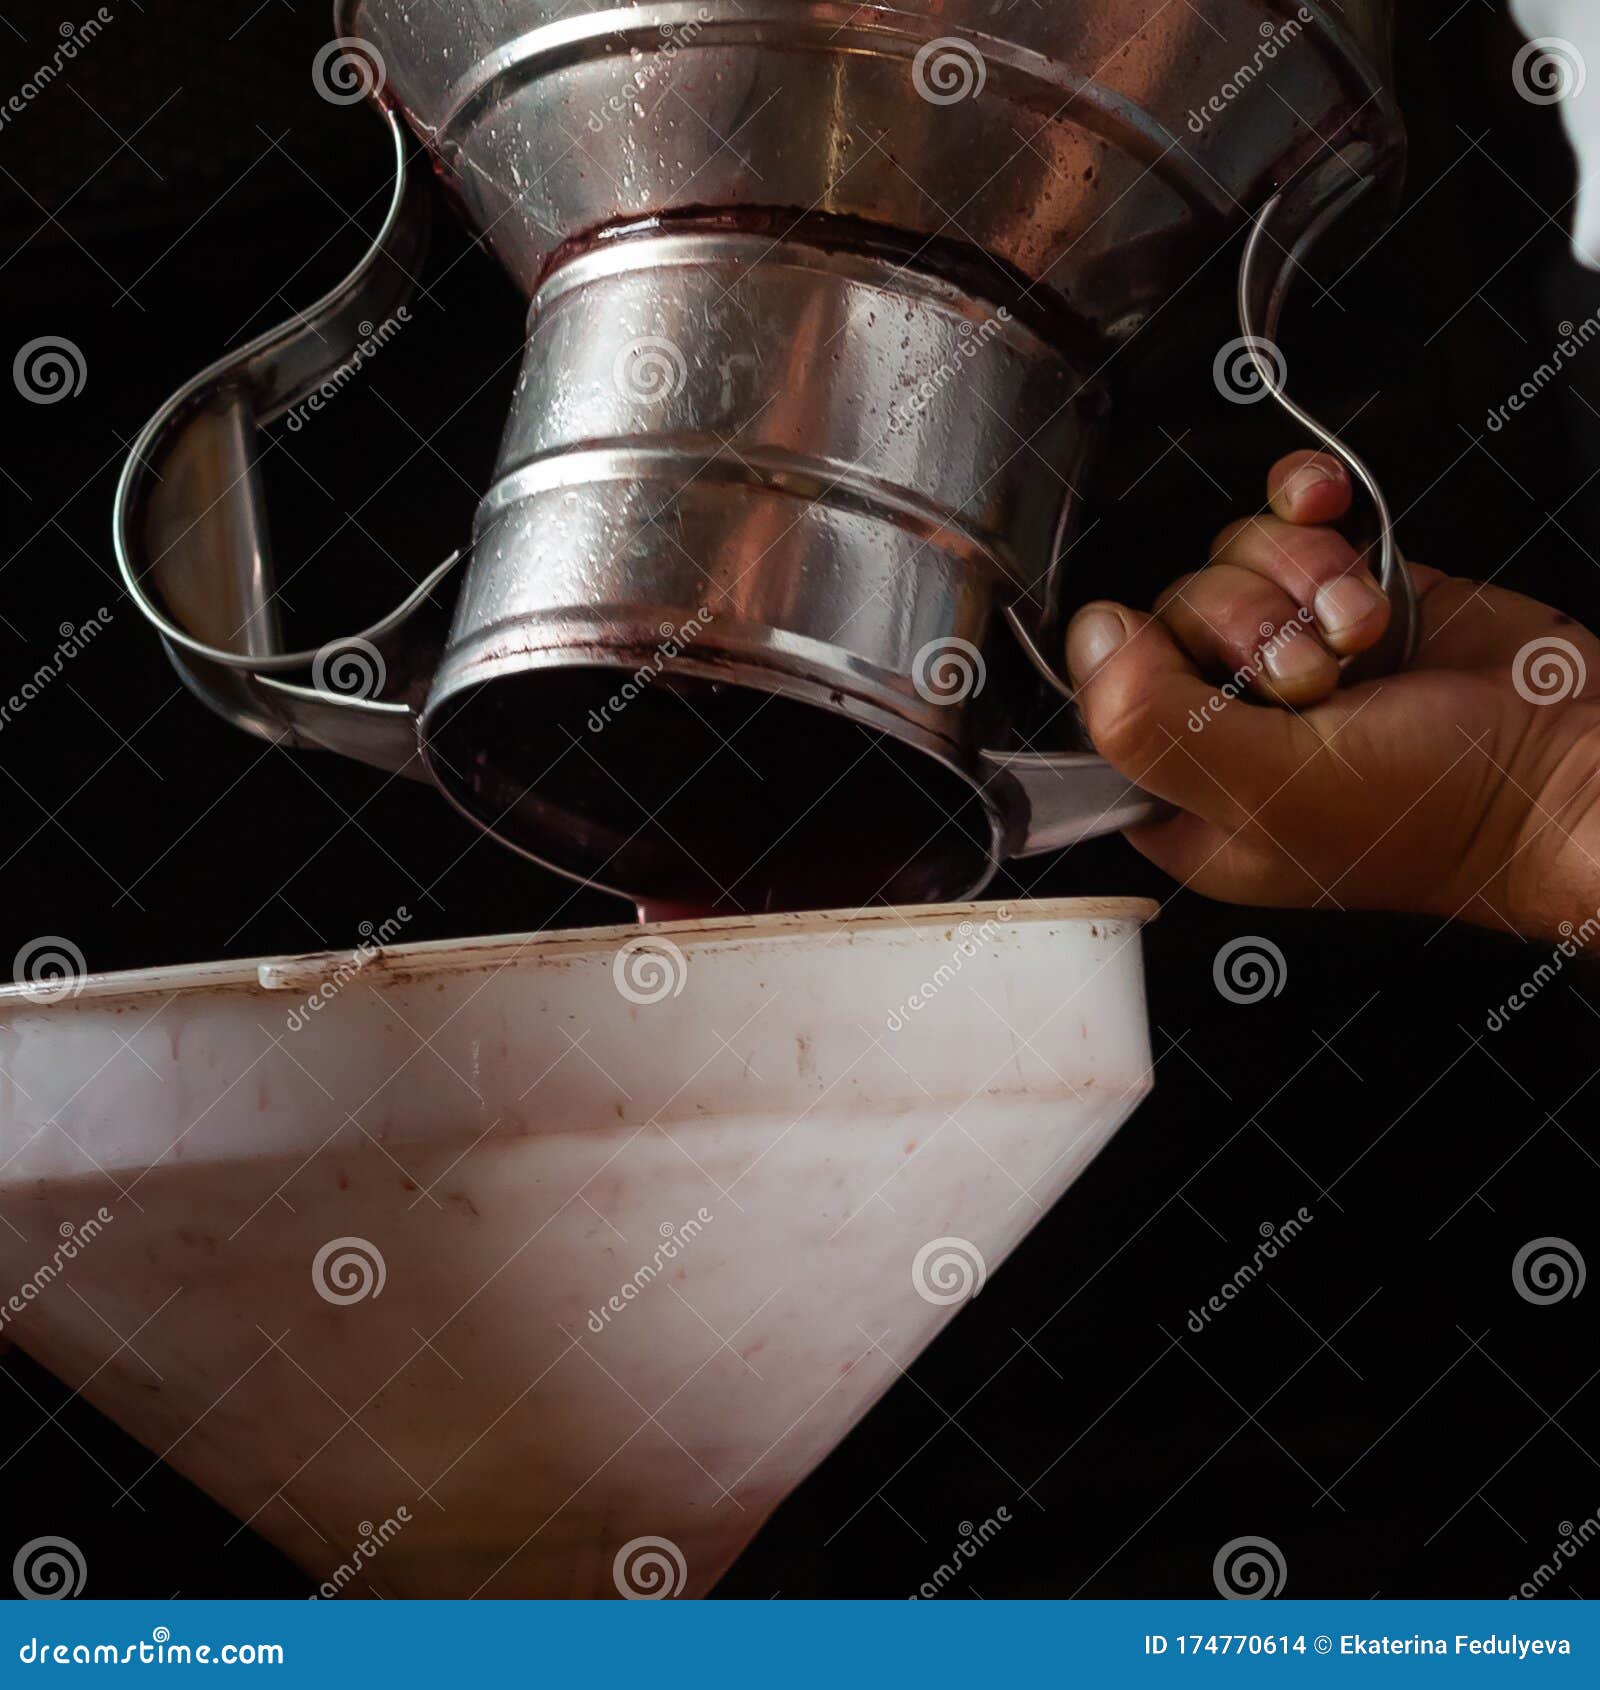 grape harvest, a man`s hands pour grape jiuce from a steel jug into a white funnel